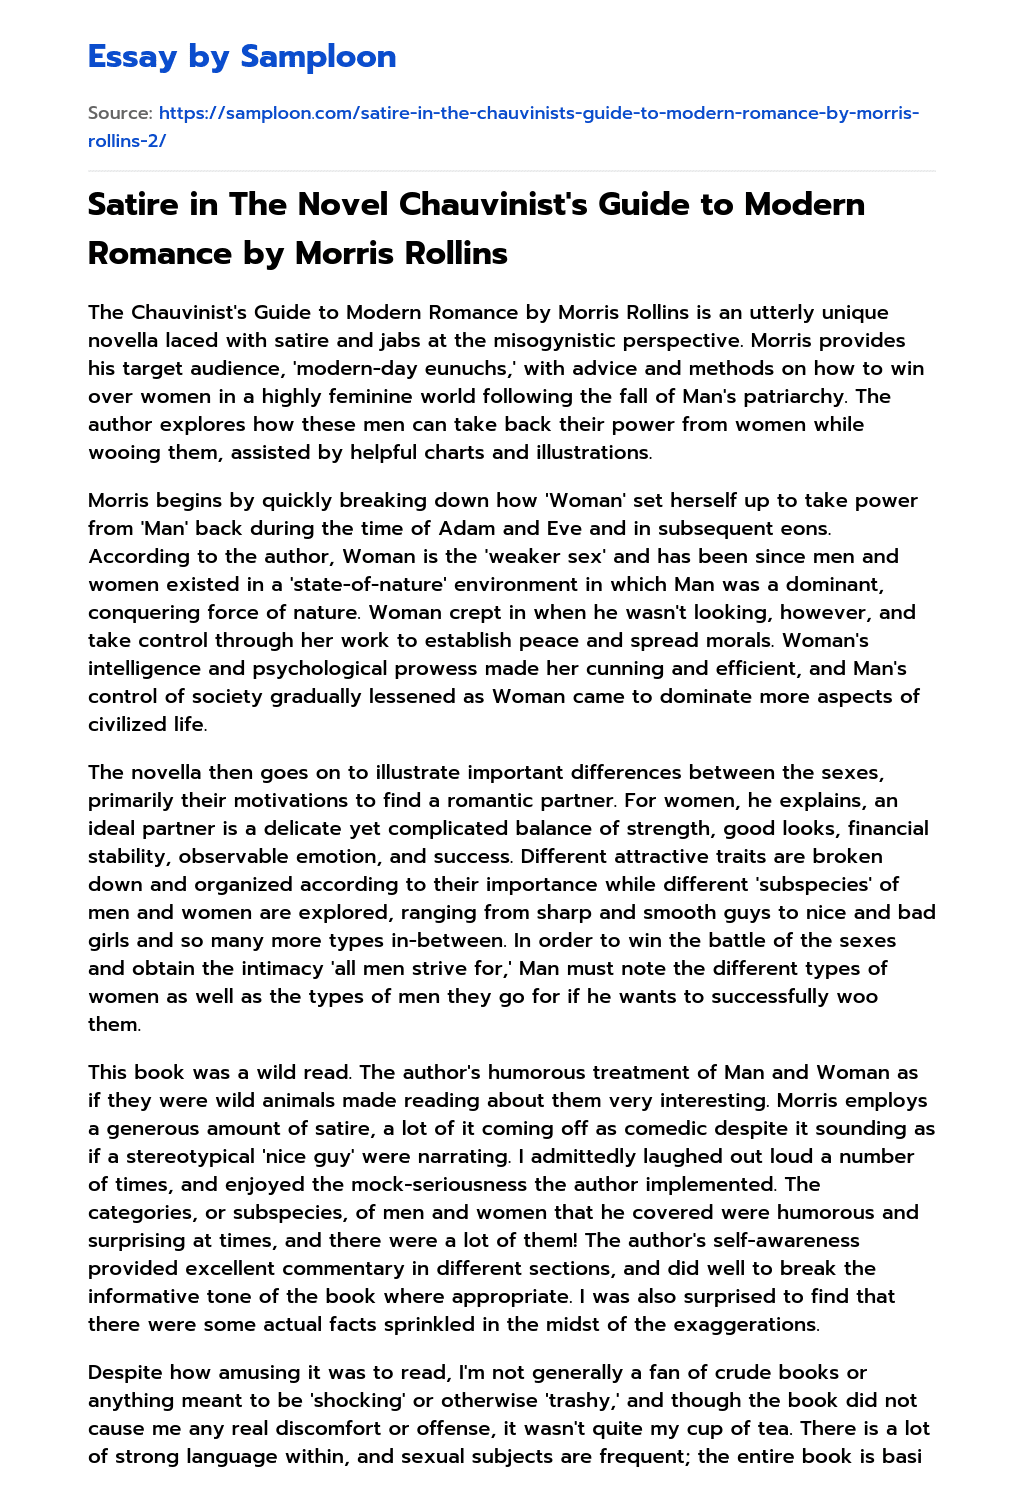 Satire in The Novel Chauvinist’s Guide to Modern Romance by Morris Rollins essay